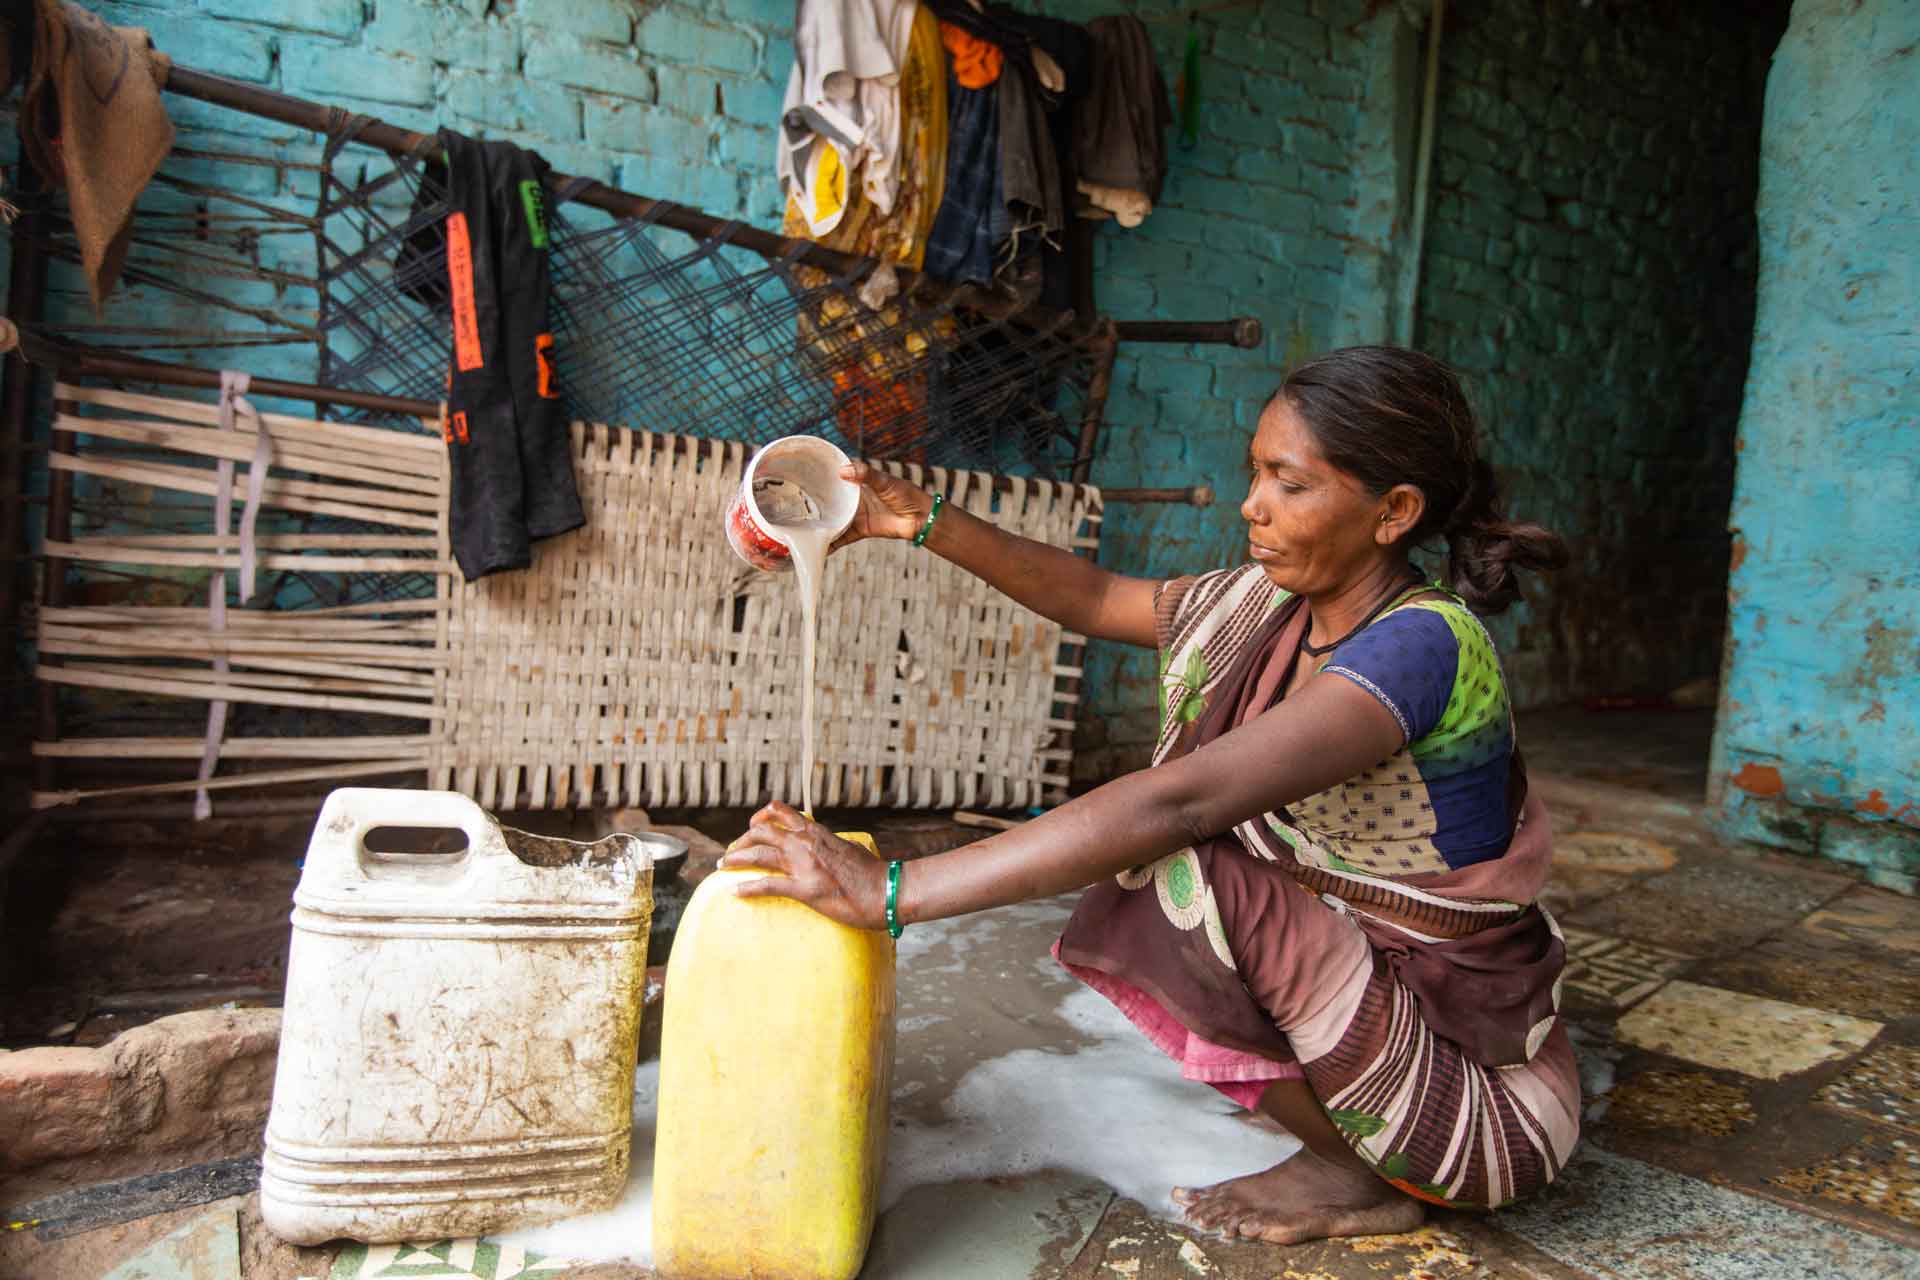 Women’s Action Towards Climate Resilience for the Urban Poor